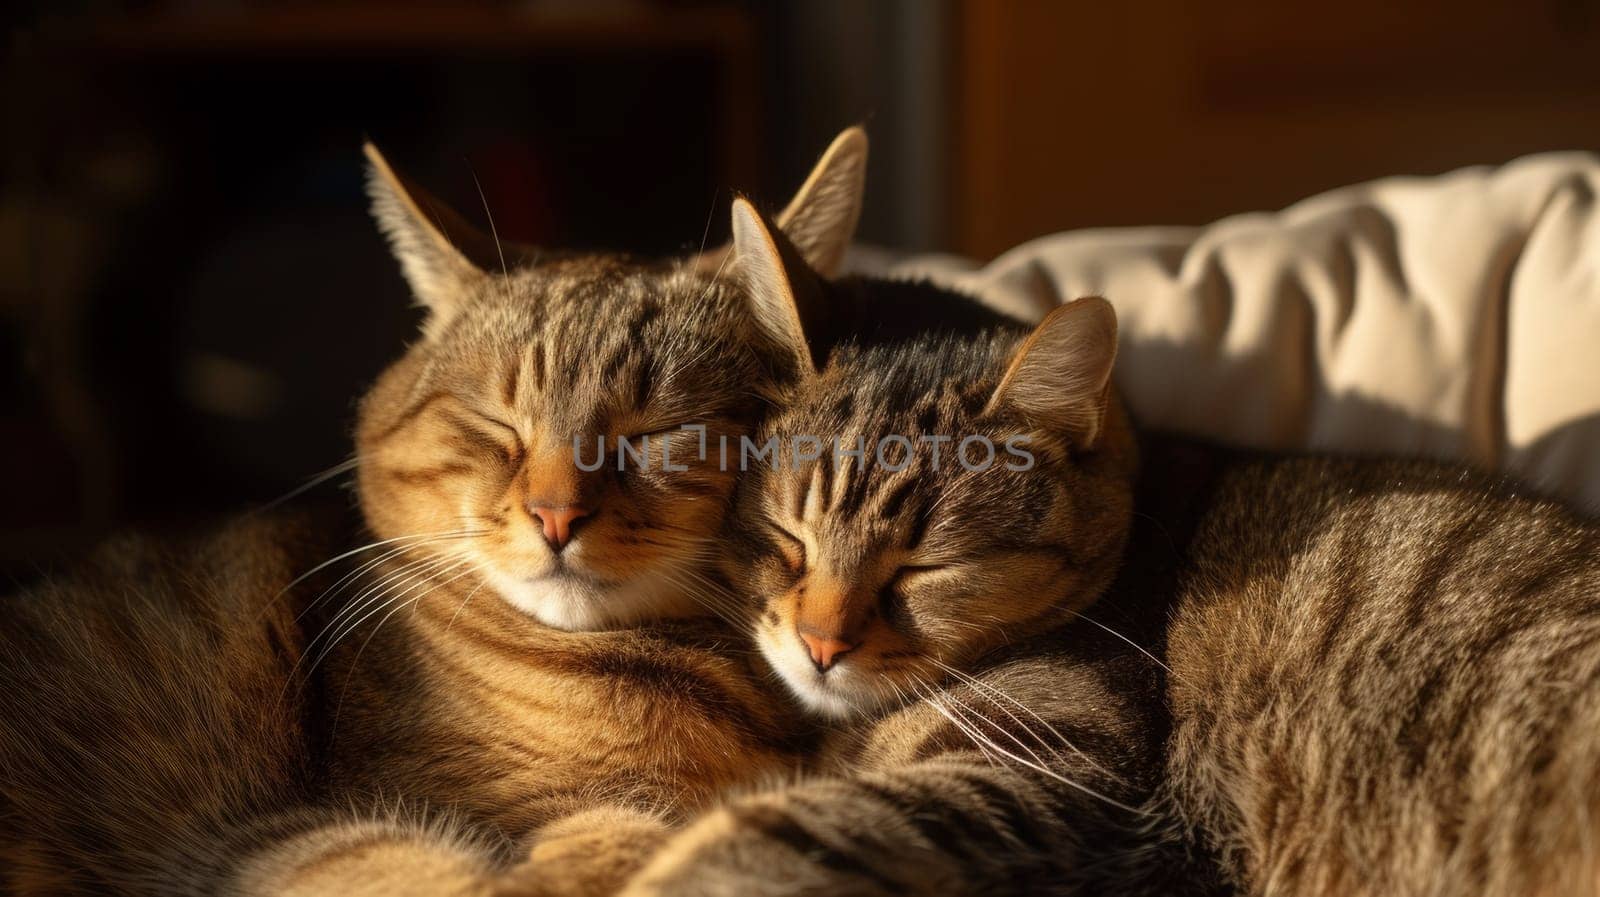 Two cats are cuddling together on a couch in the sun